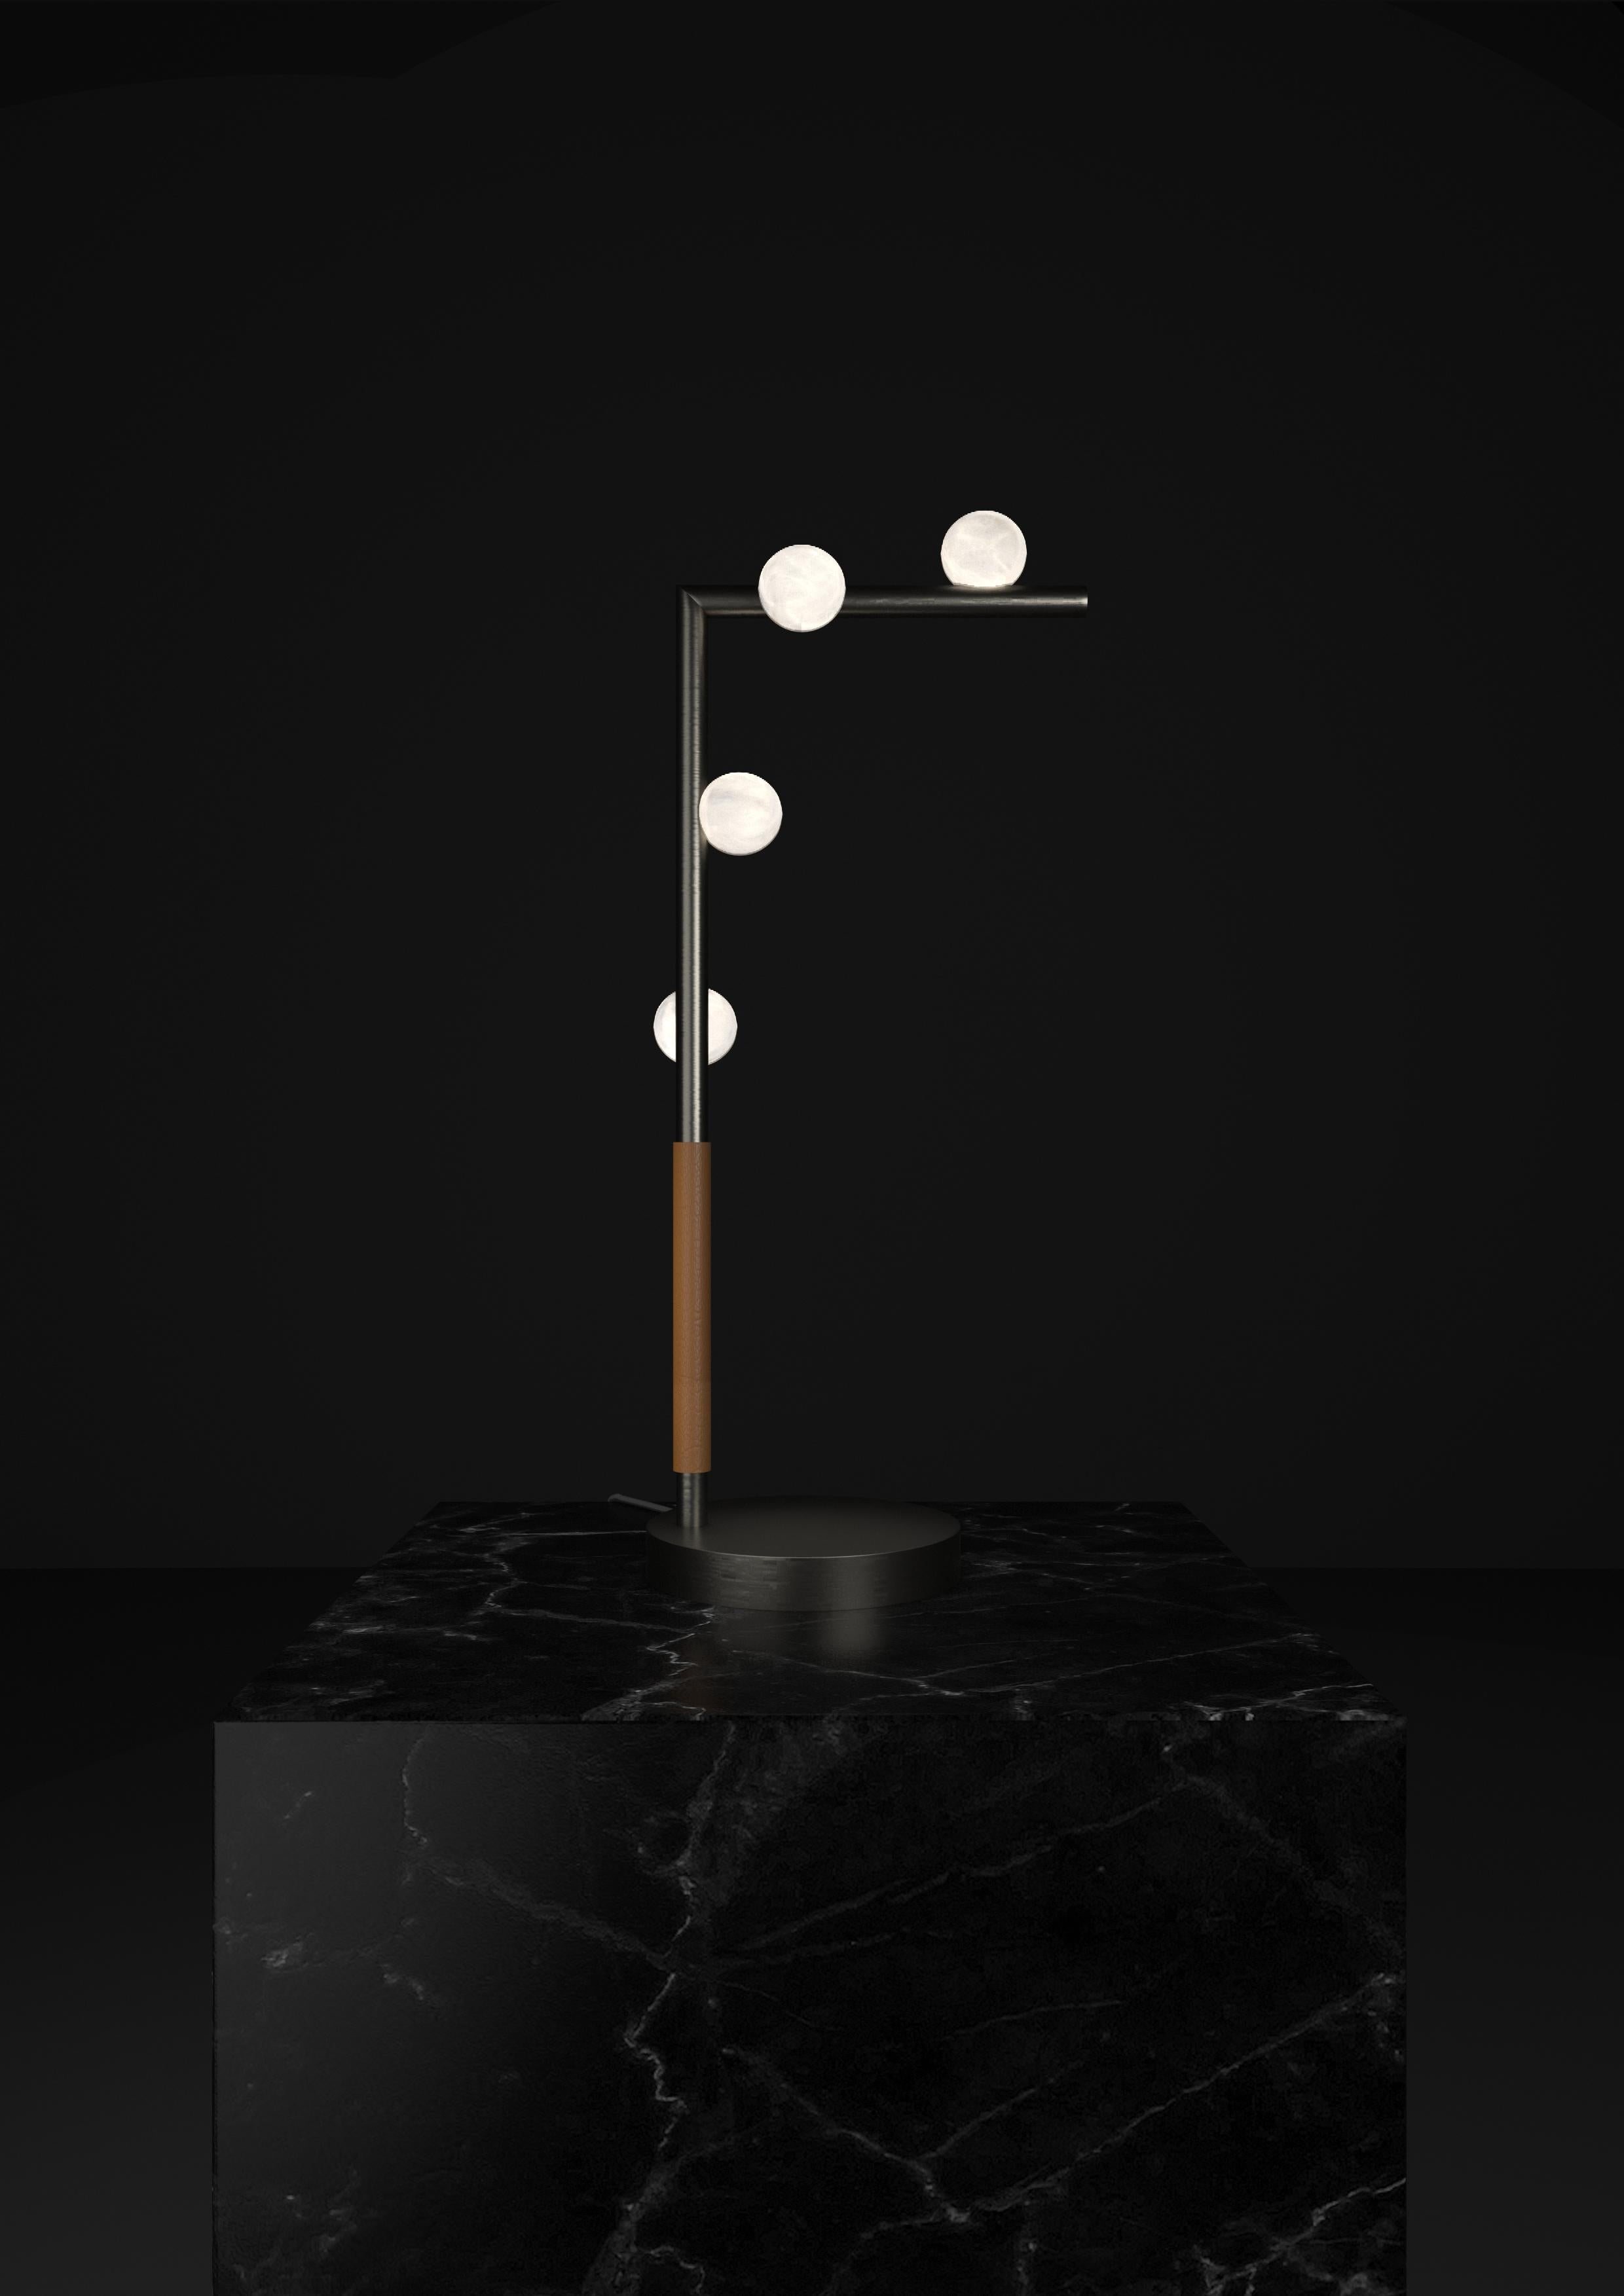 Demetra Brushed Black Metal Table Lamp by Alabastro Italiano
Dimensions: D 20 x W 35 x H 67 cm.
Materials: White alabaster, metal and leather.

Available in different finishes: Shiny Silver, Bronze, Brushed Brass, Ruggine of Florence, Brushed